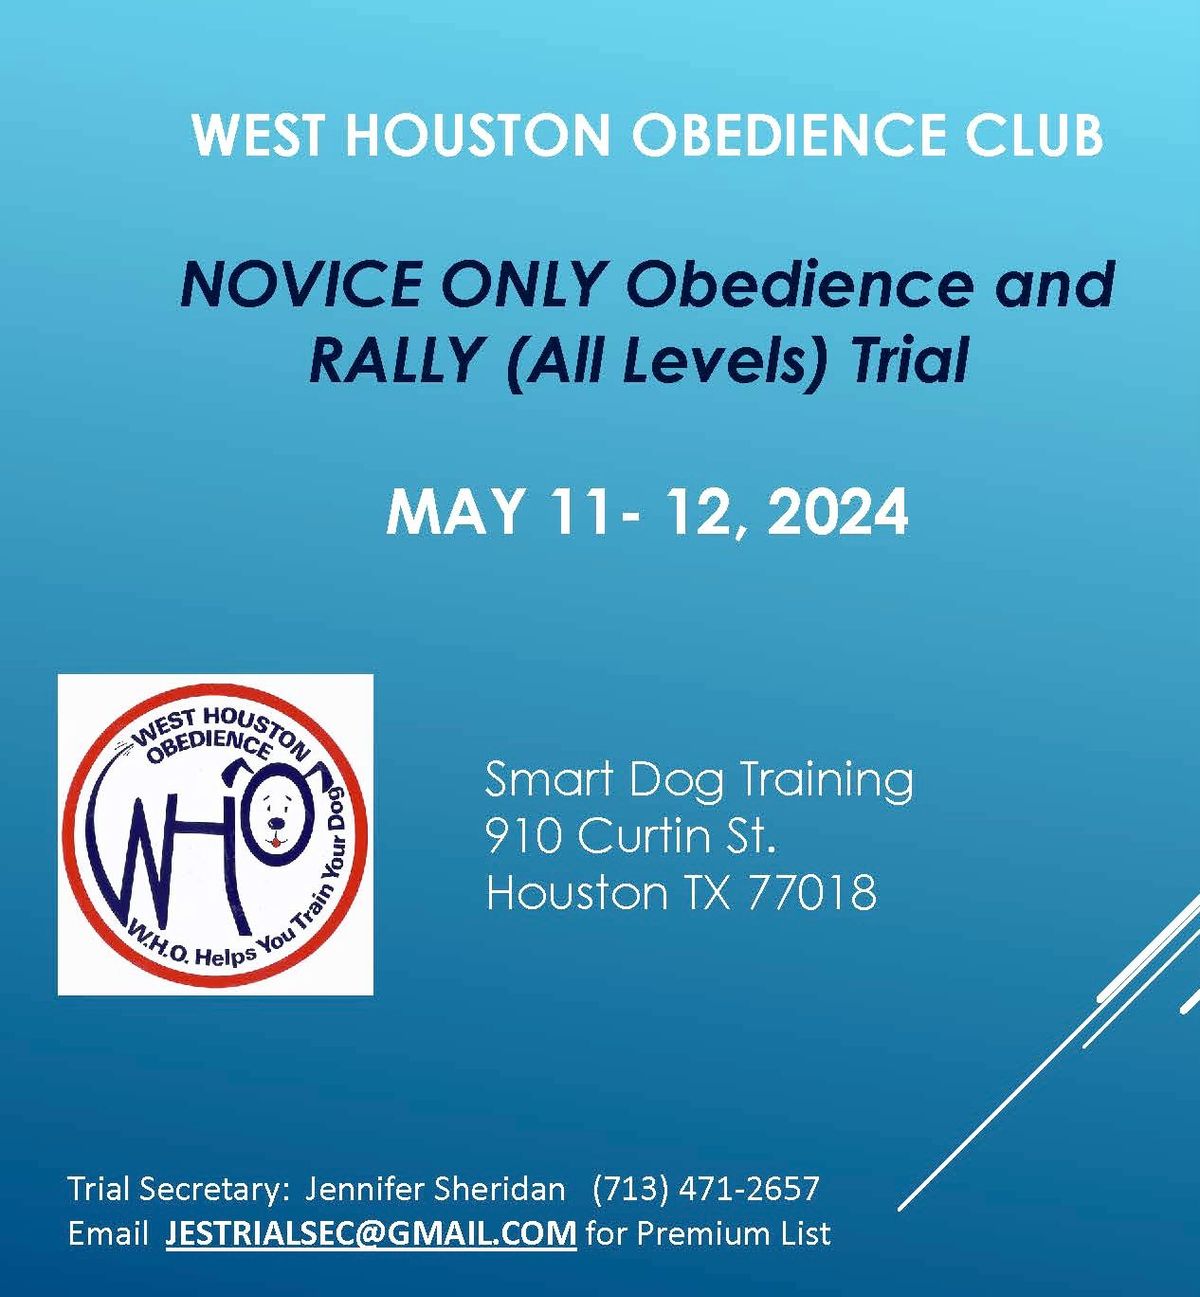 Novice Obedience and Rally (All Levels) Trial